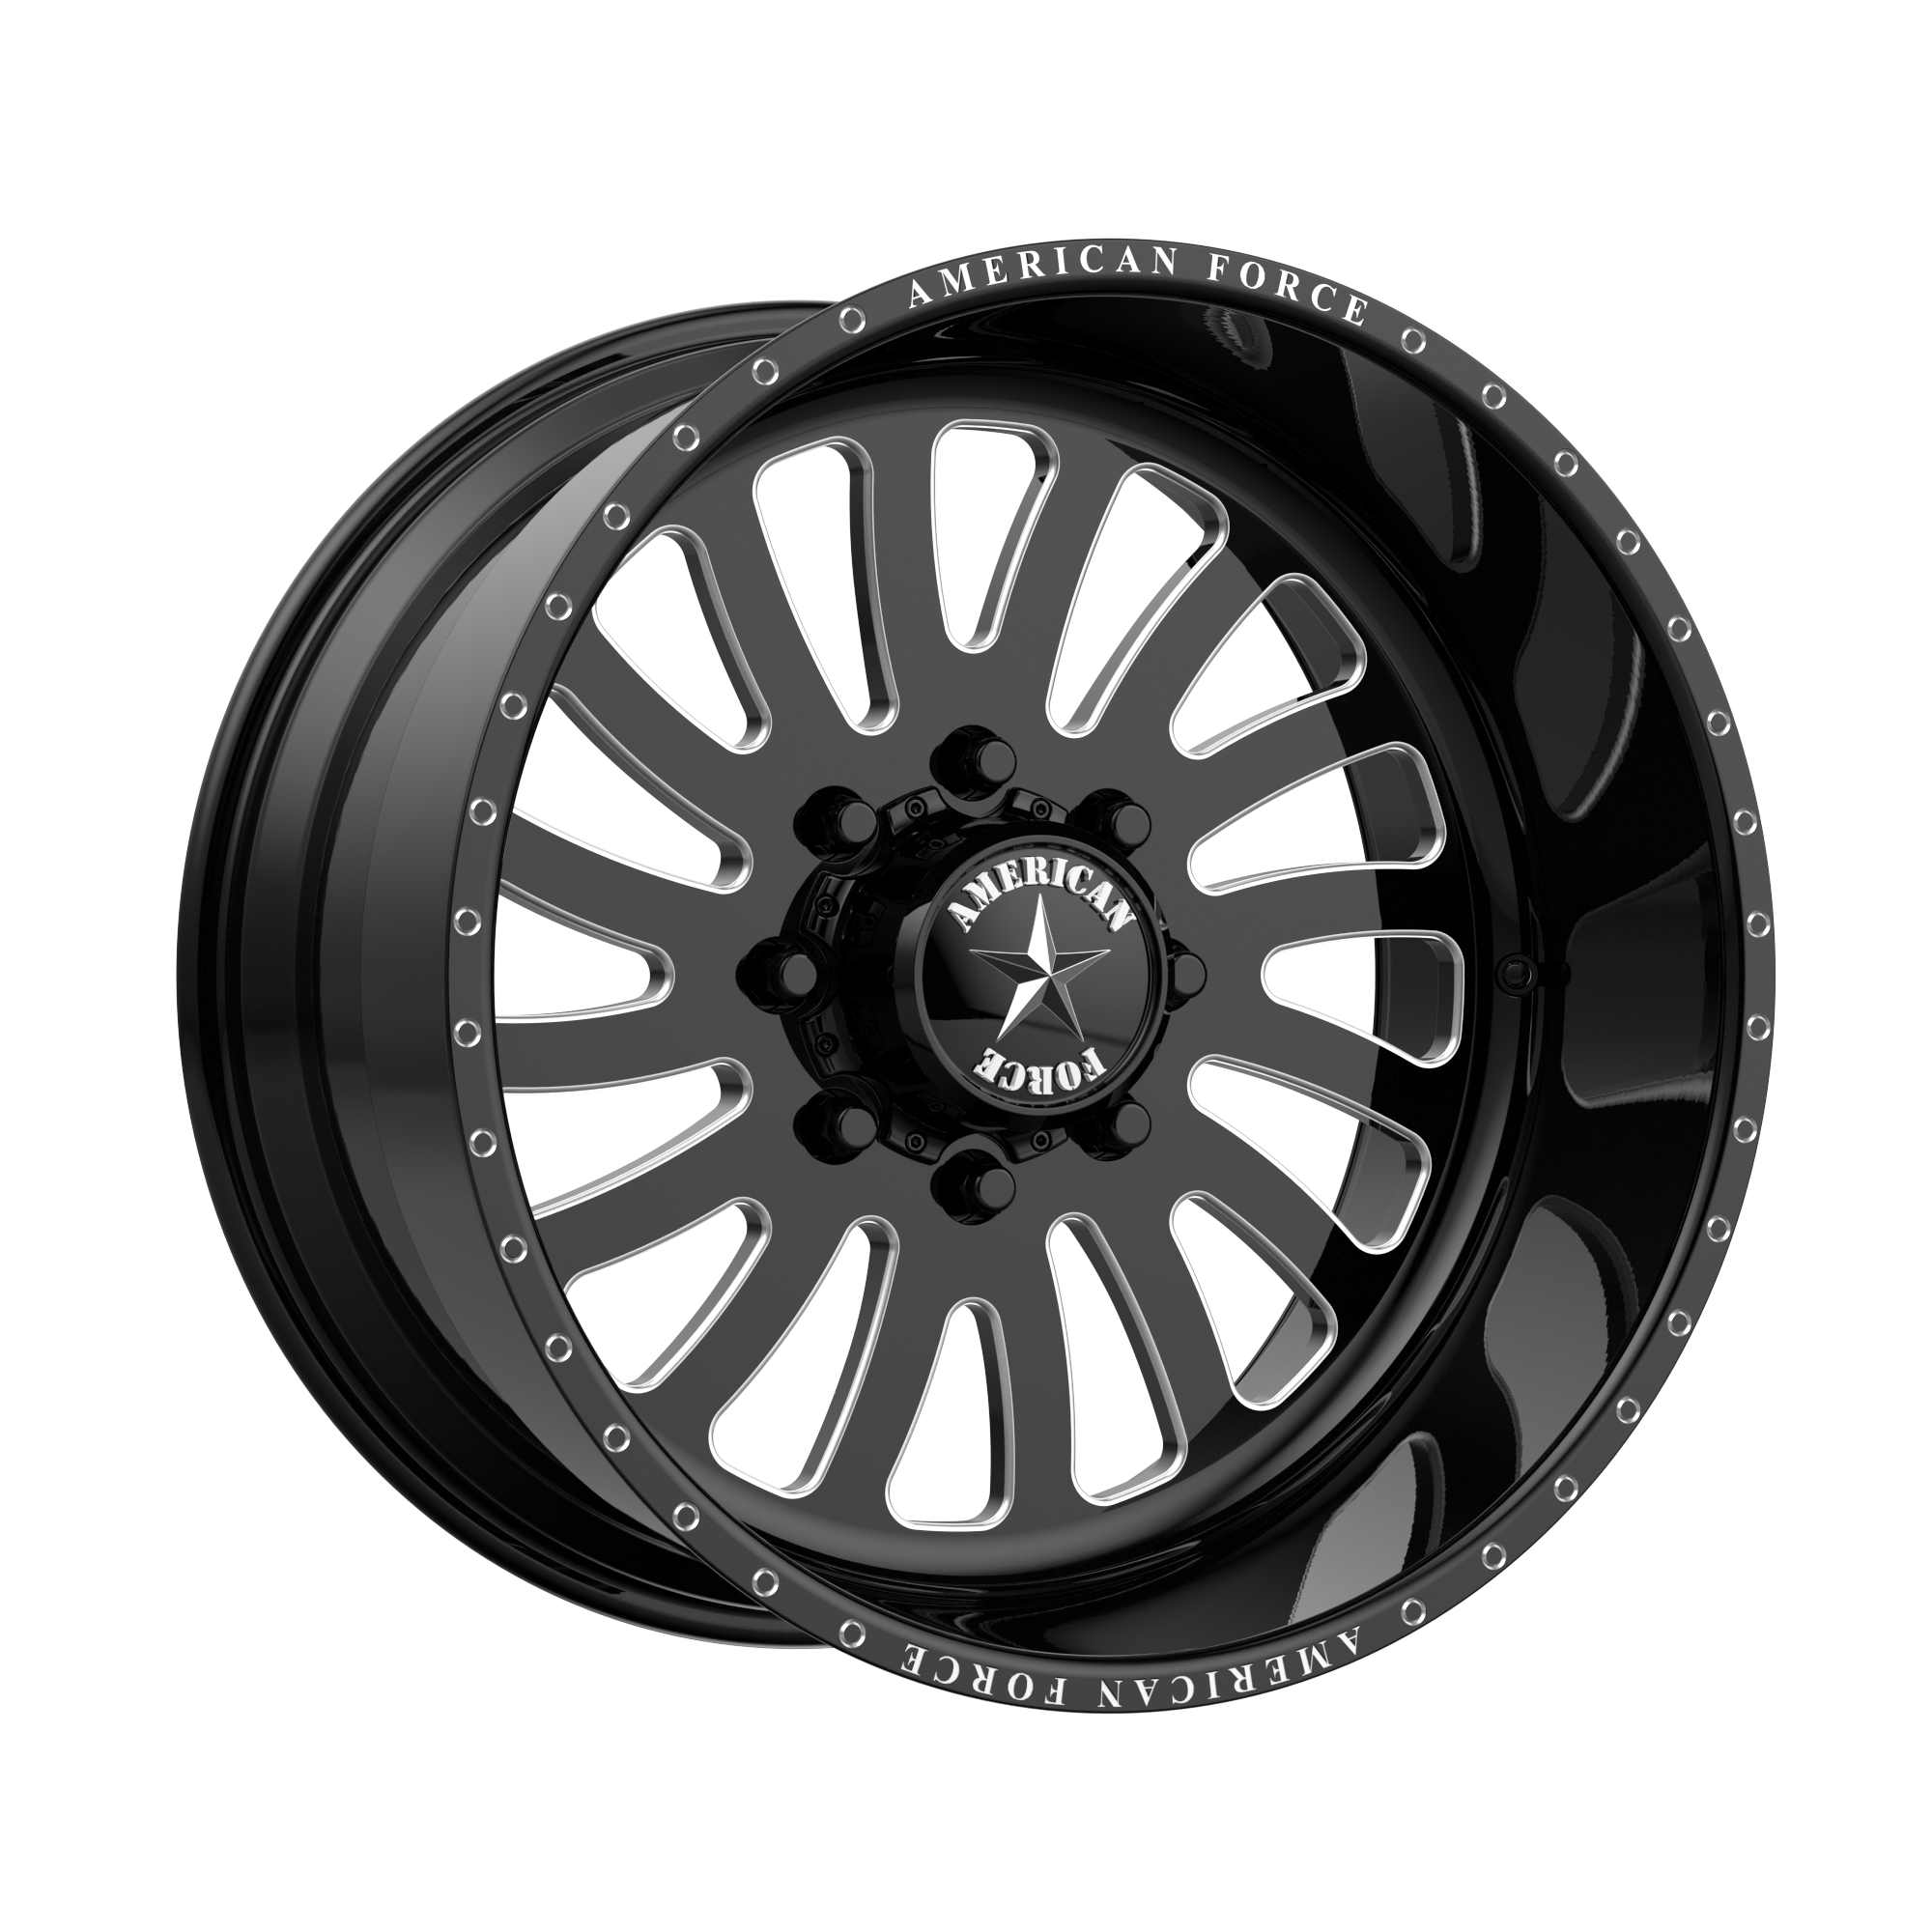 OCTANE SS 22x16 6x139.70 GLOSS BLACK MACHINED (-101 mm) - Tires and Engine Performance